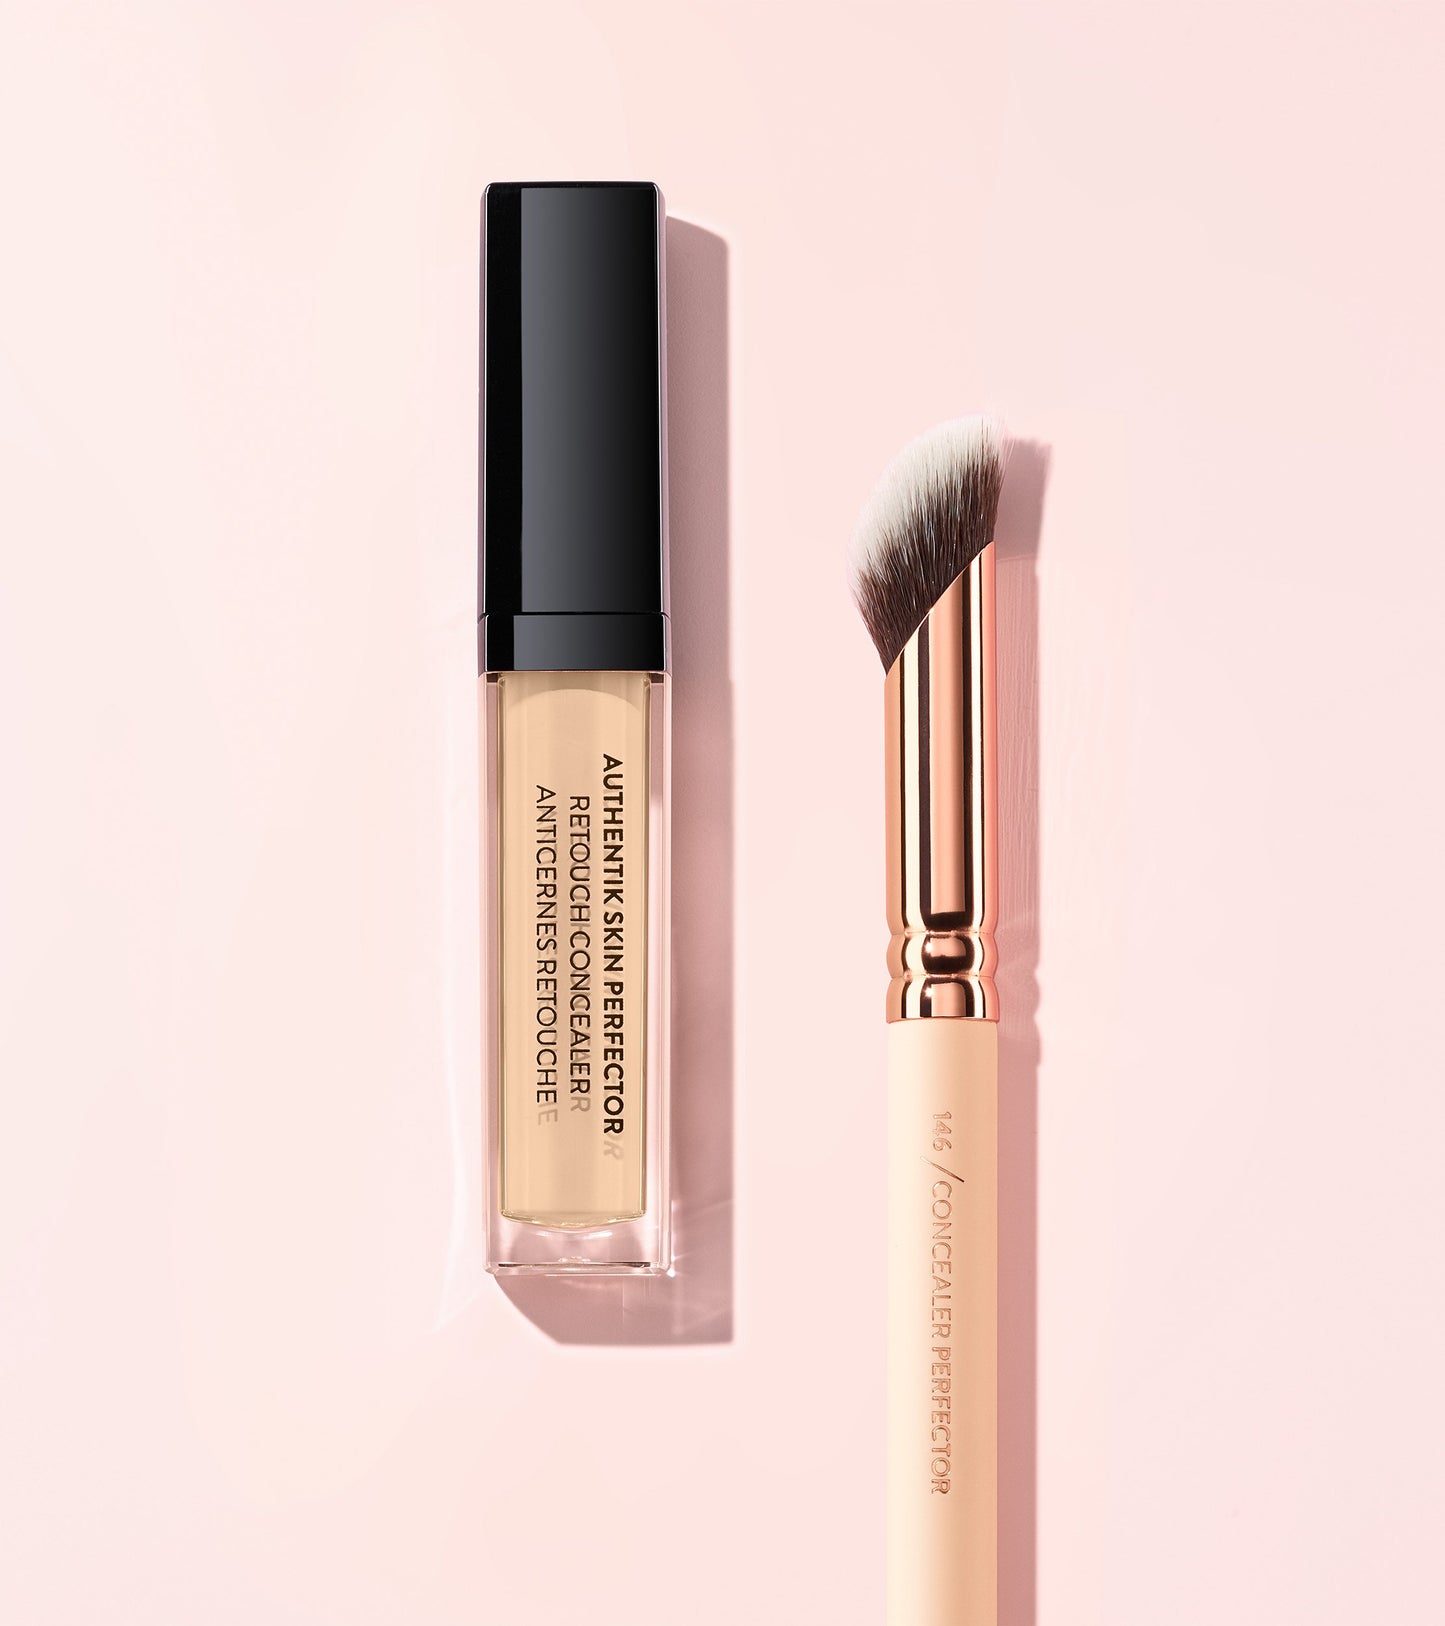 AUTHENTIK SKIN PERFECTOR CONCEALER (110 EMBODIED) Expanded Image 3